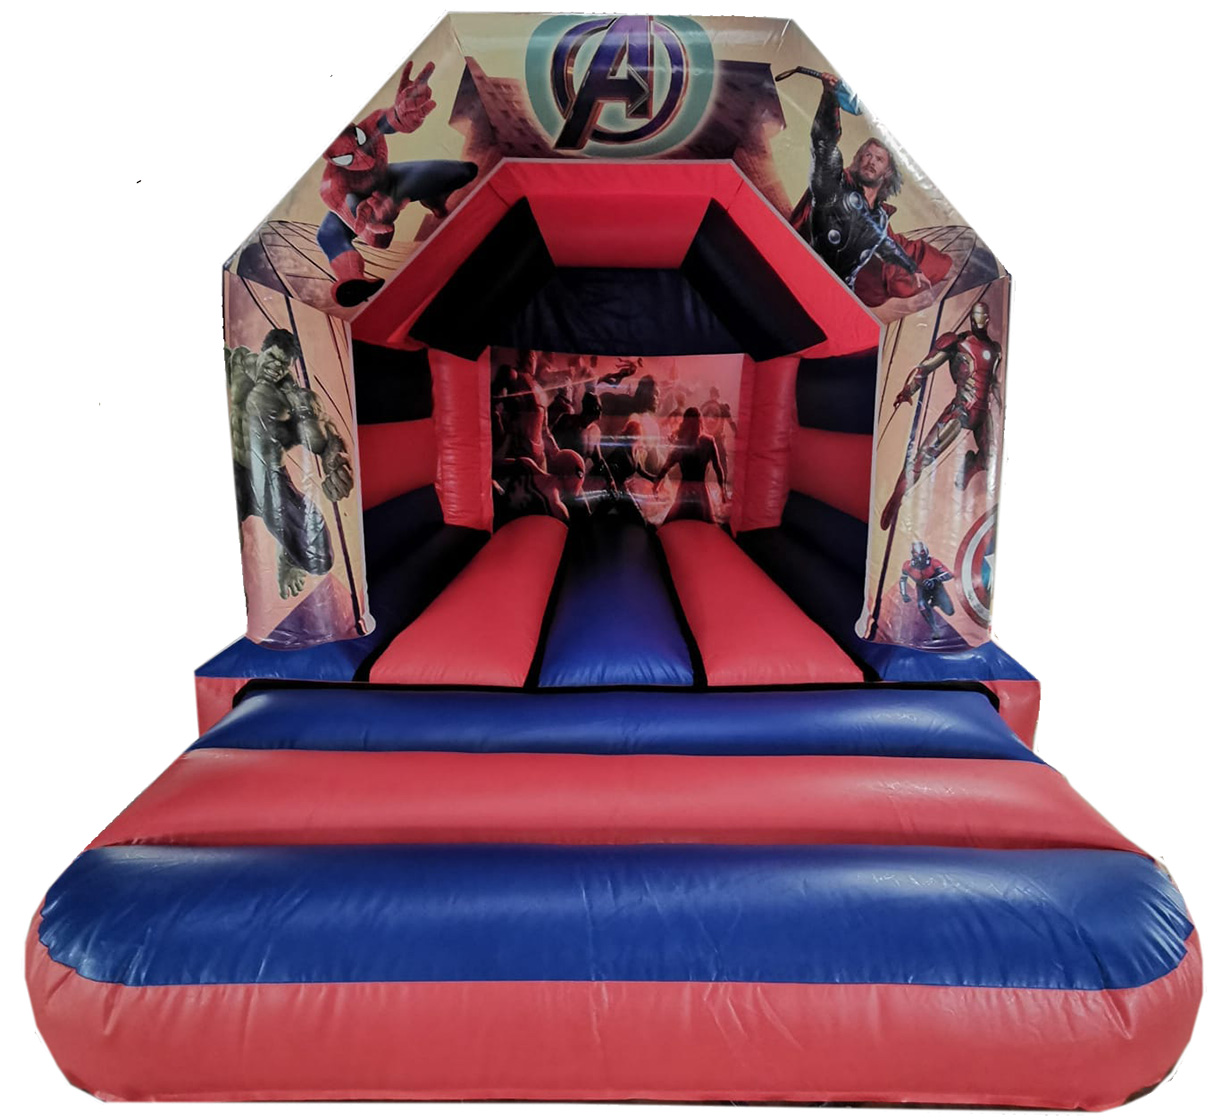 Bouncy Castle Sales - BC623 - Bouncy Inflatable for sale